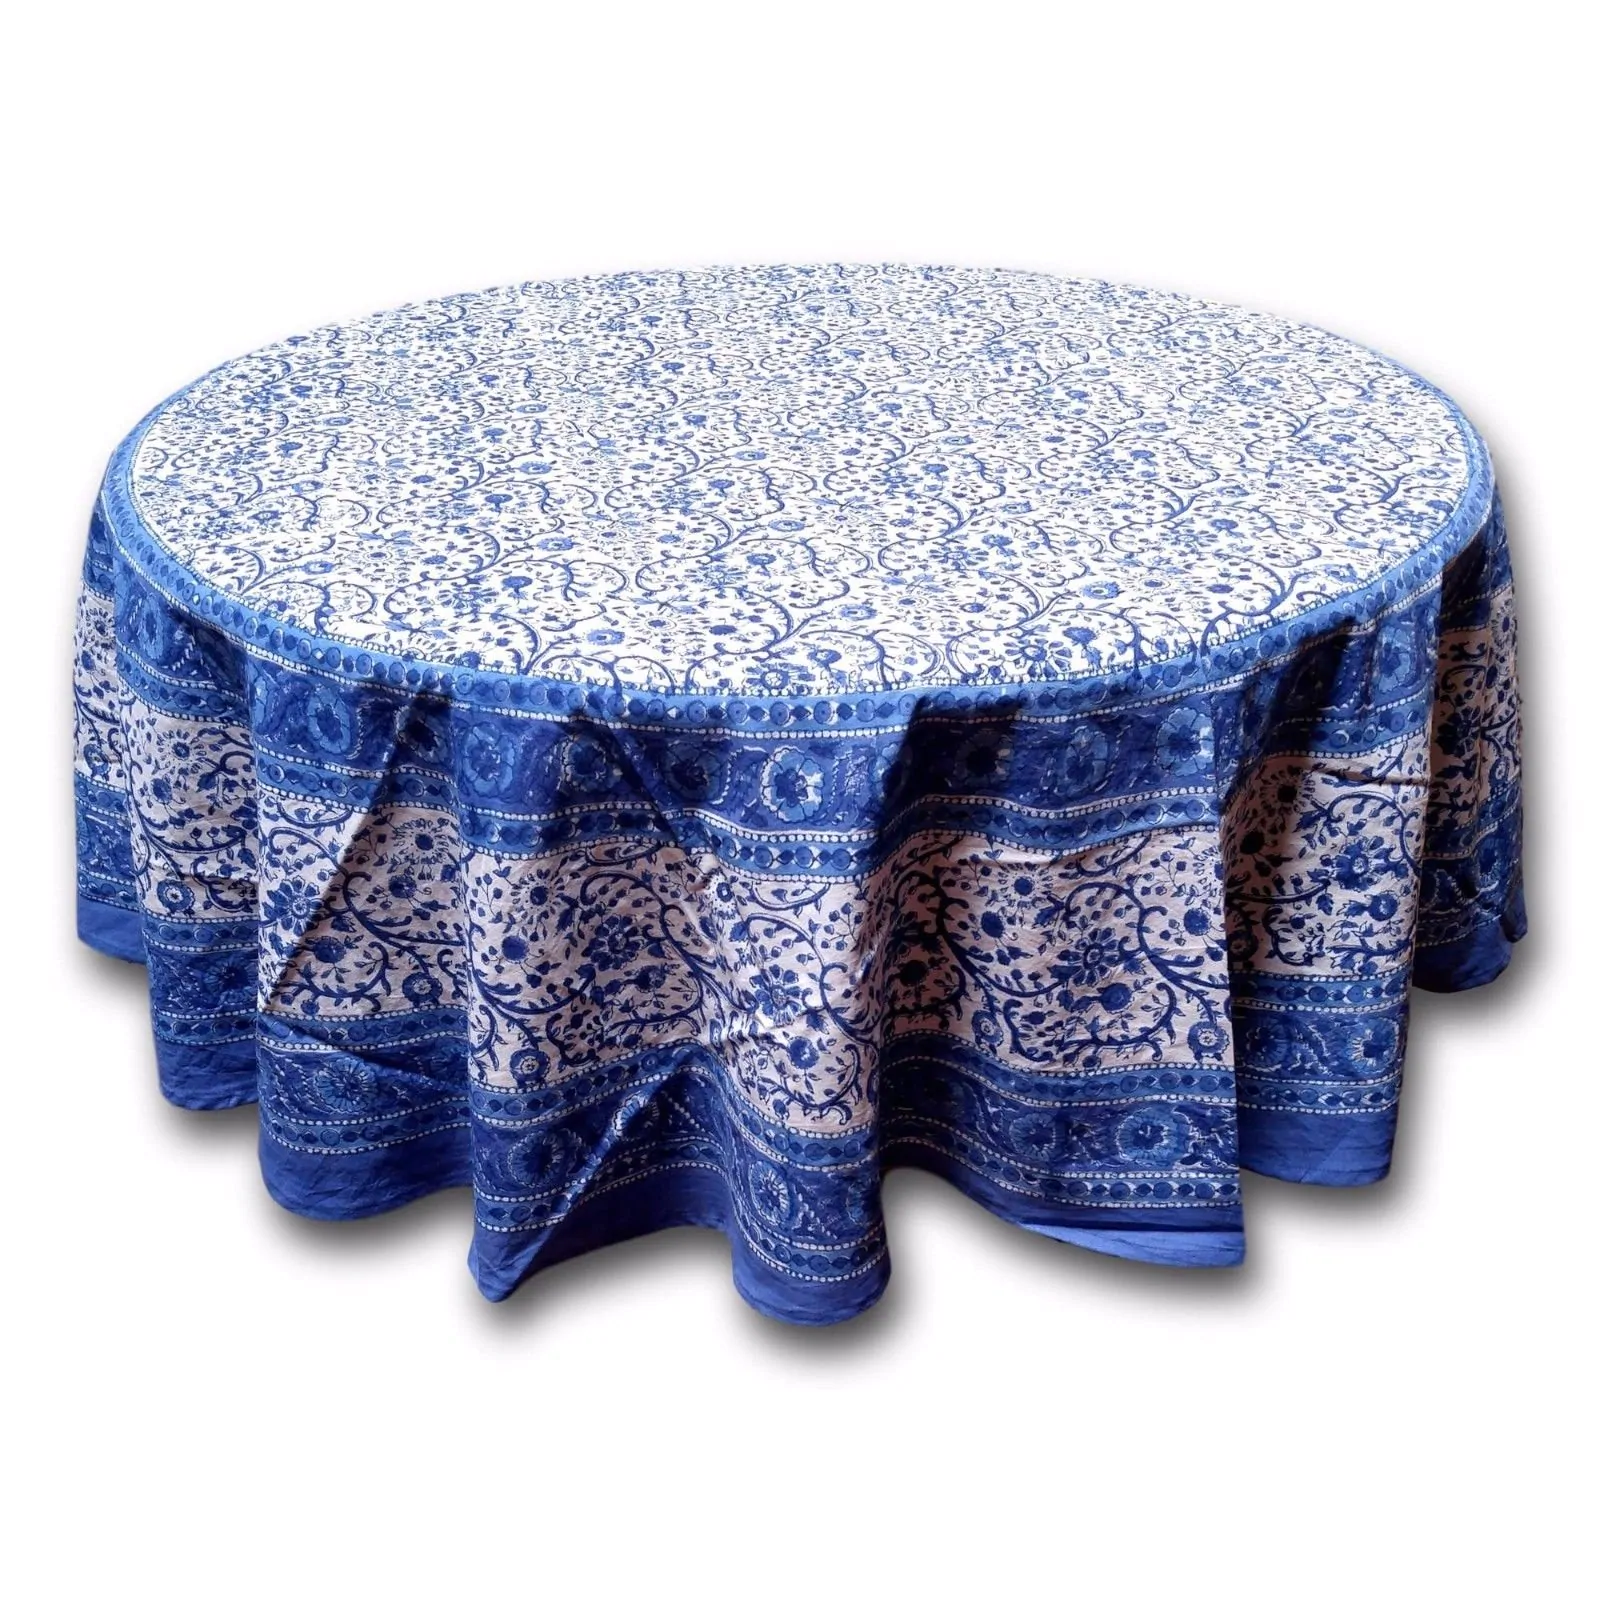 blue tablecloths our best table linens rajasthan block print floral round tablecloth rectangular cotton napkins placemats runner small accent covers decor monarch mirrored side